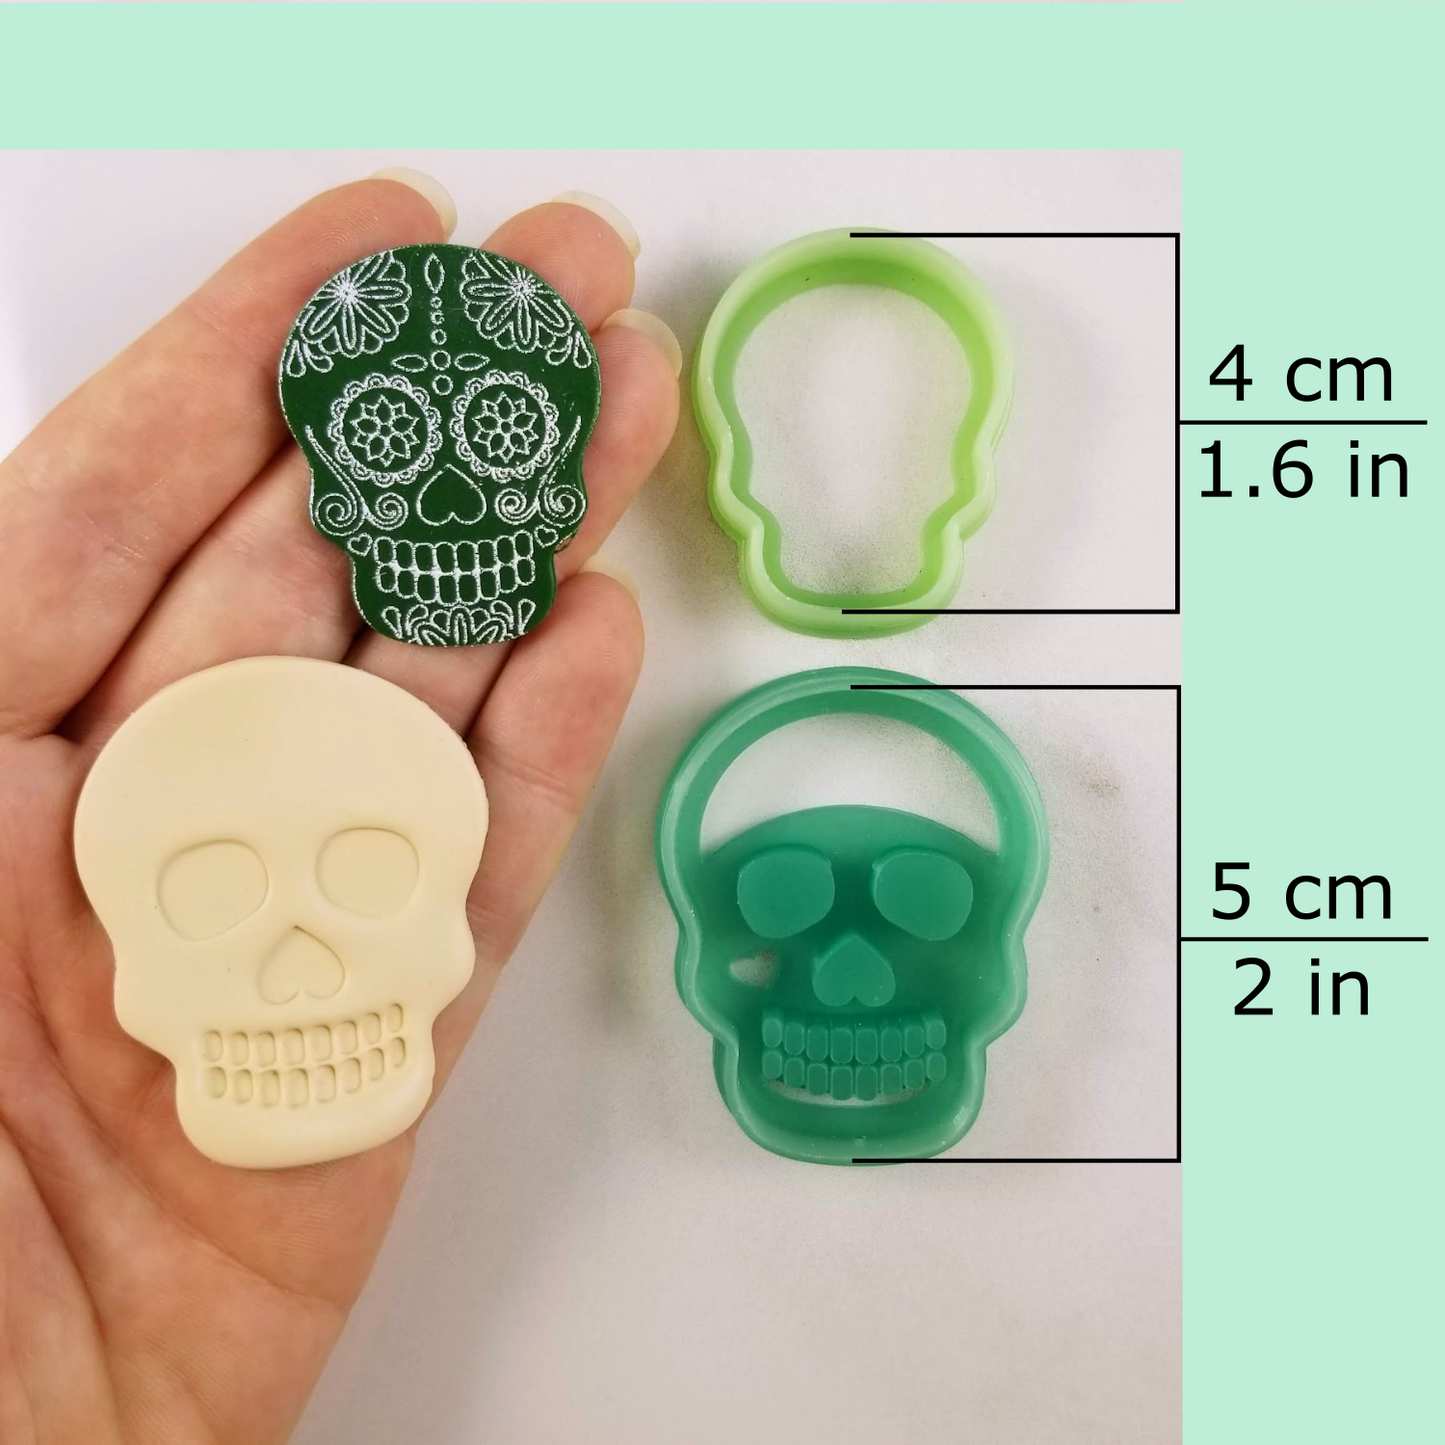 Debossing/embossing and outline skull polymer clay cutters dimensions: large, medium, dangle, statement sizes. 